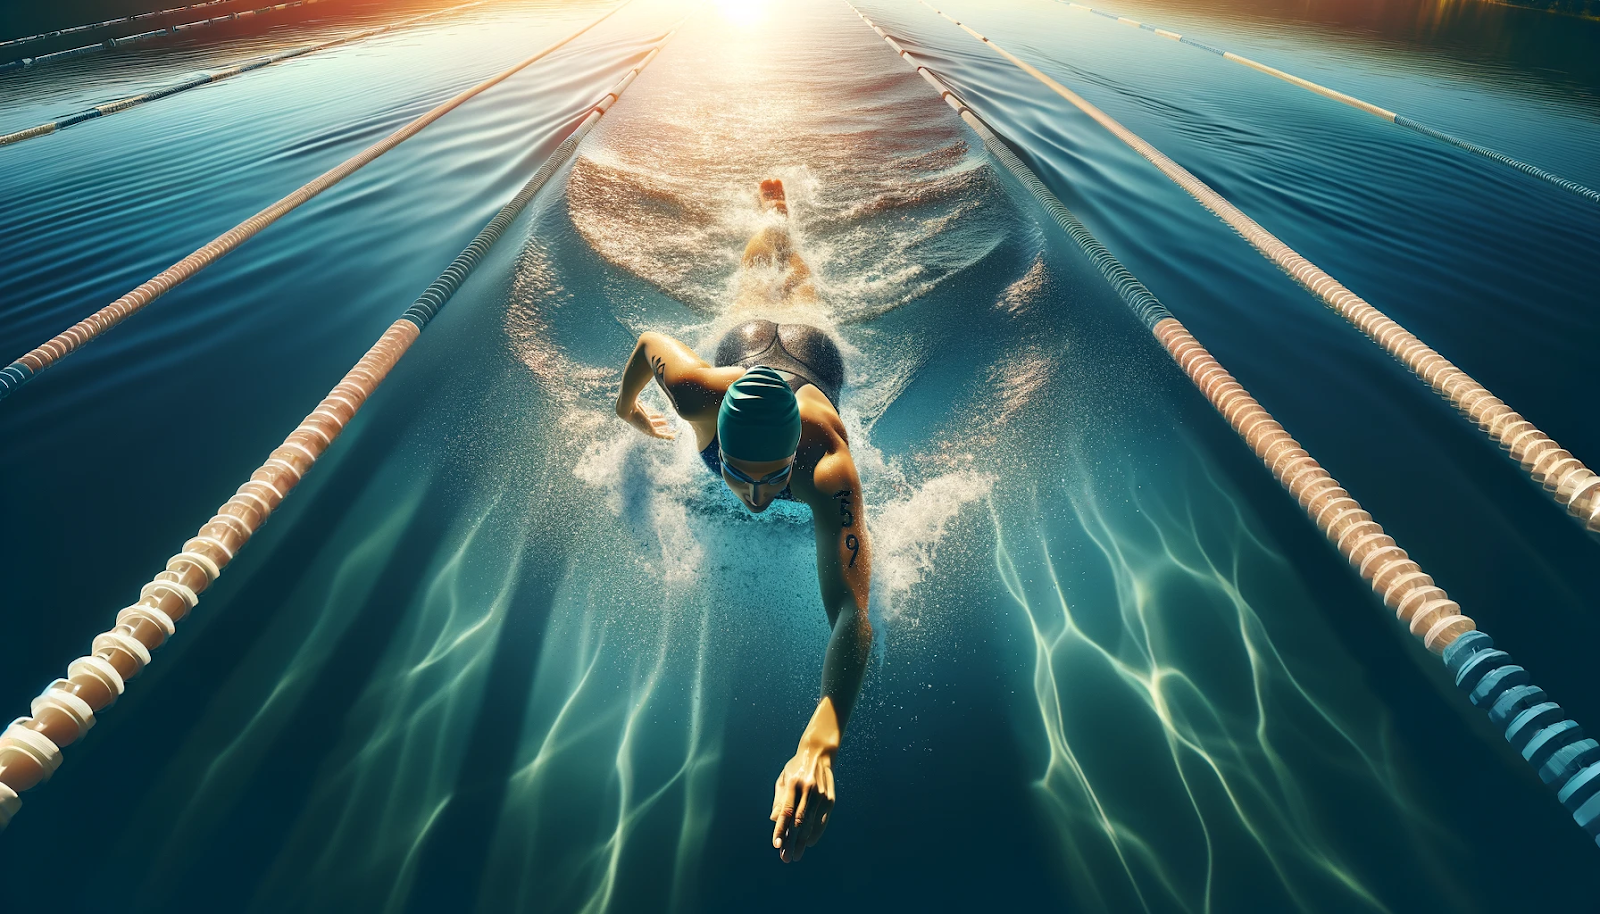 Top-down perspective of a triathlete's efficient stroke technique in a clear blue lake during a triathlon swim leg.